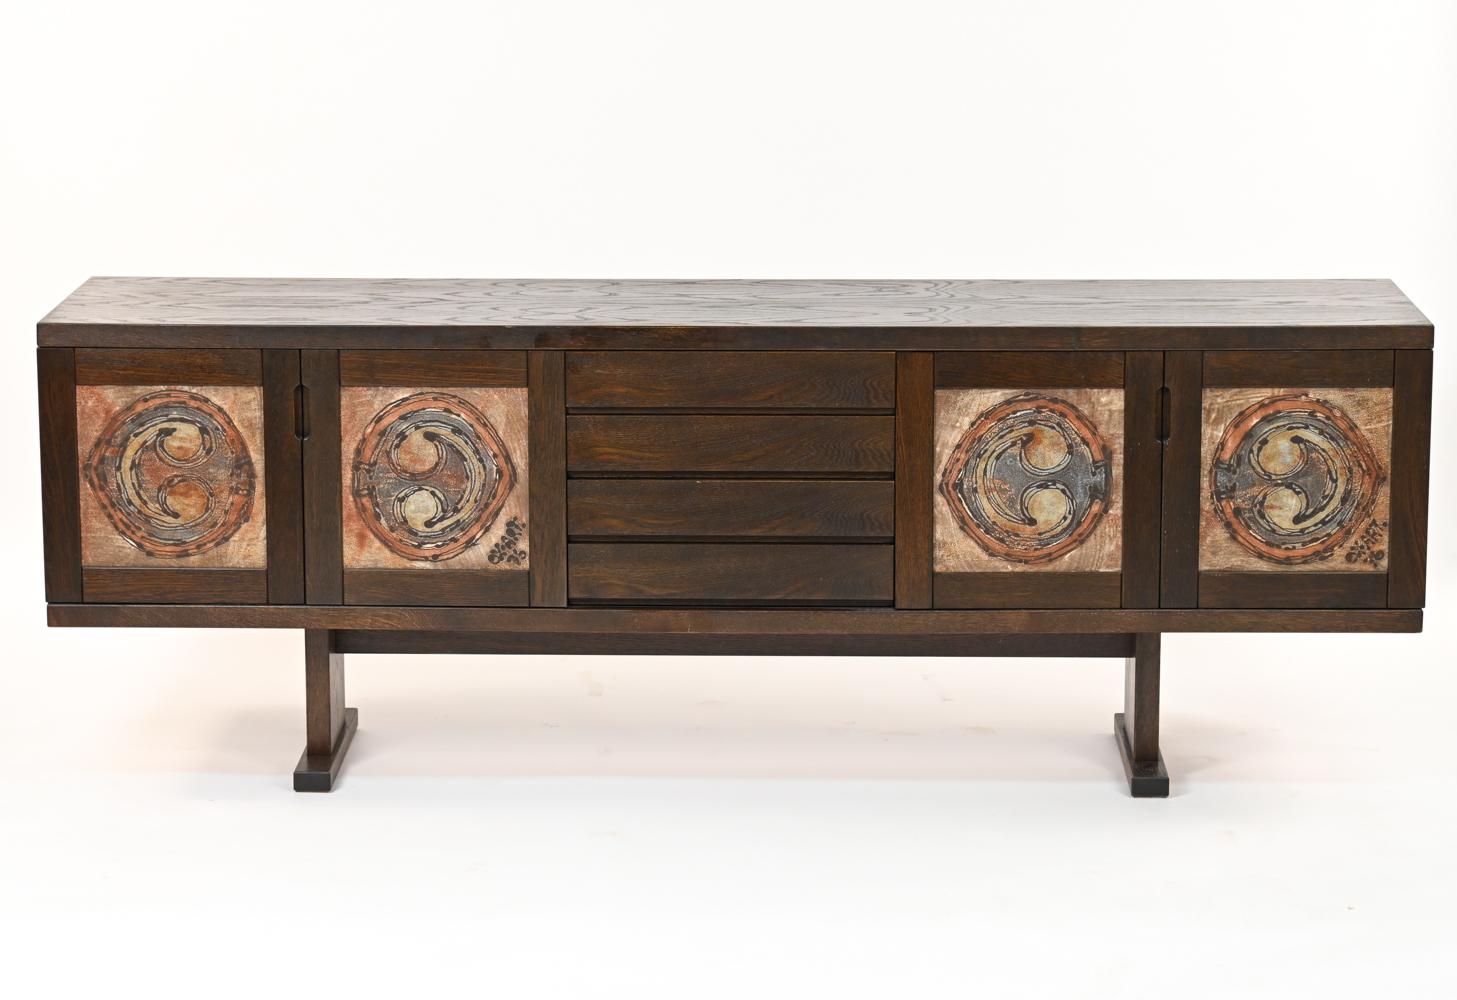 This is a fabulous sideboard in dark stained oakwood made by Skovby, circa 1970s. This piece features ceramic 